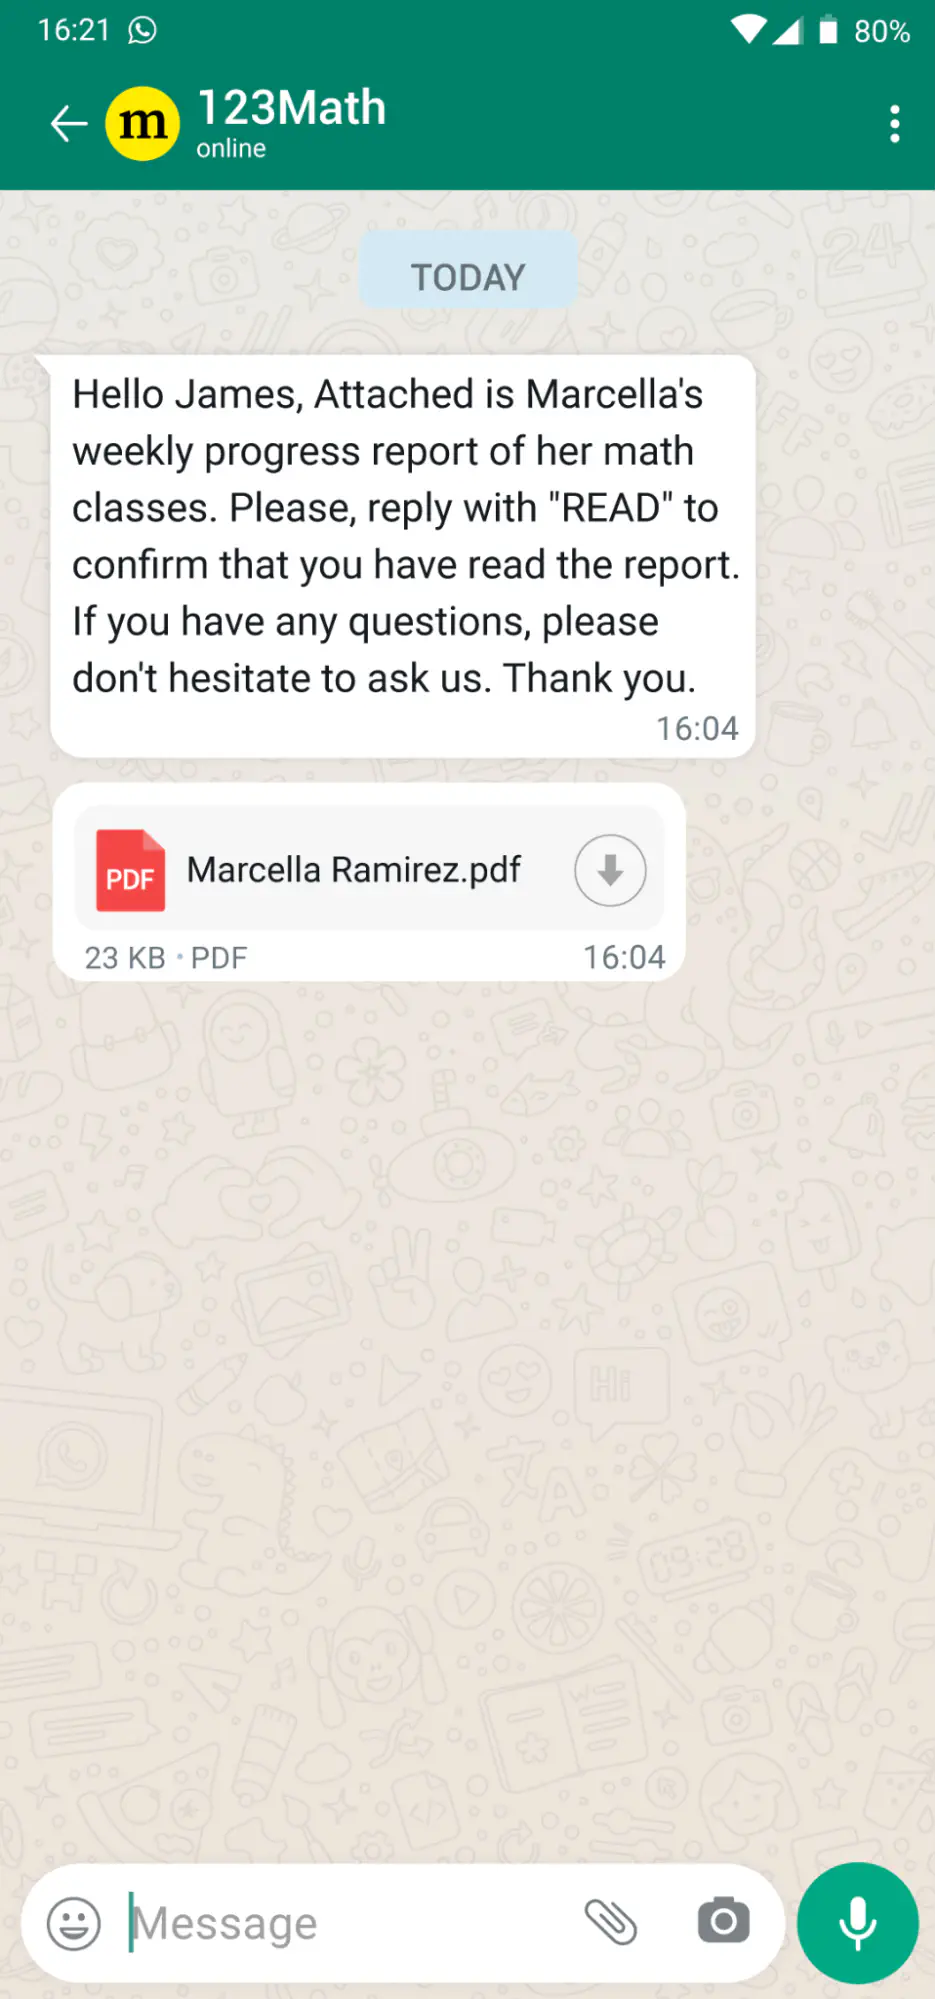 WhatsApp chatbot sending learning materials to a student.